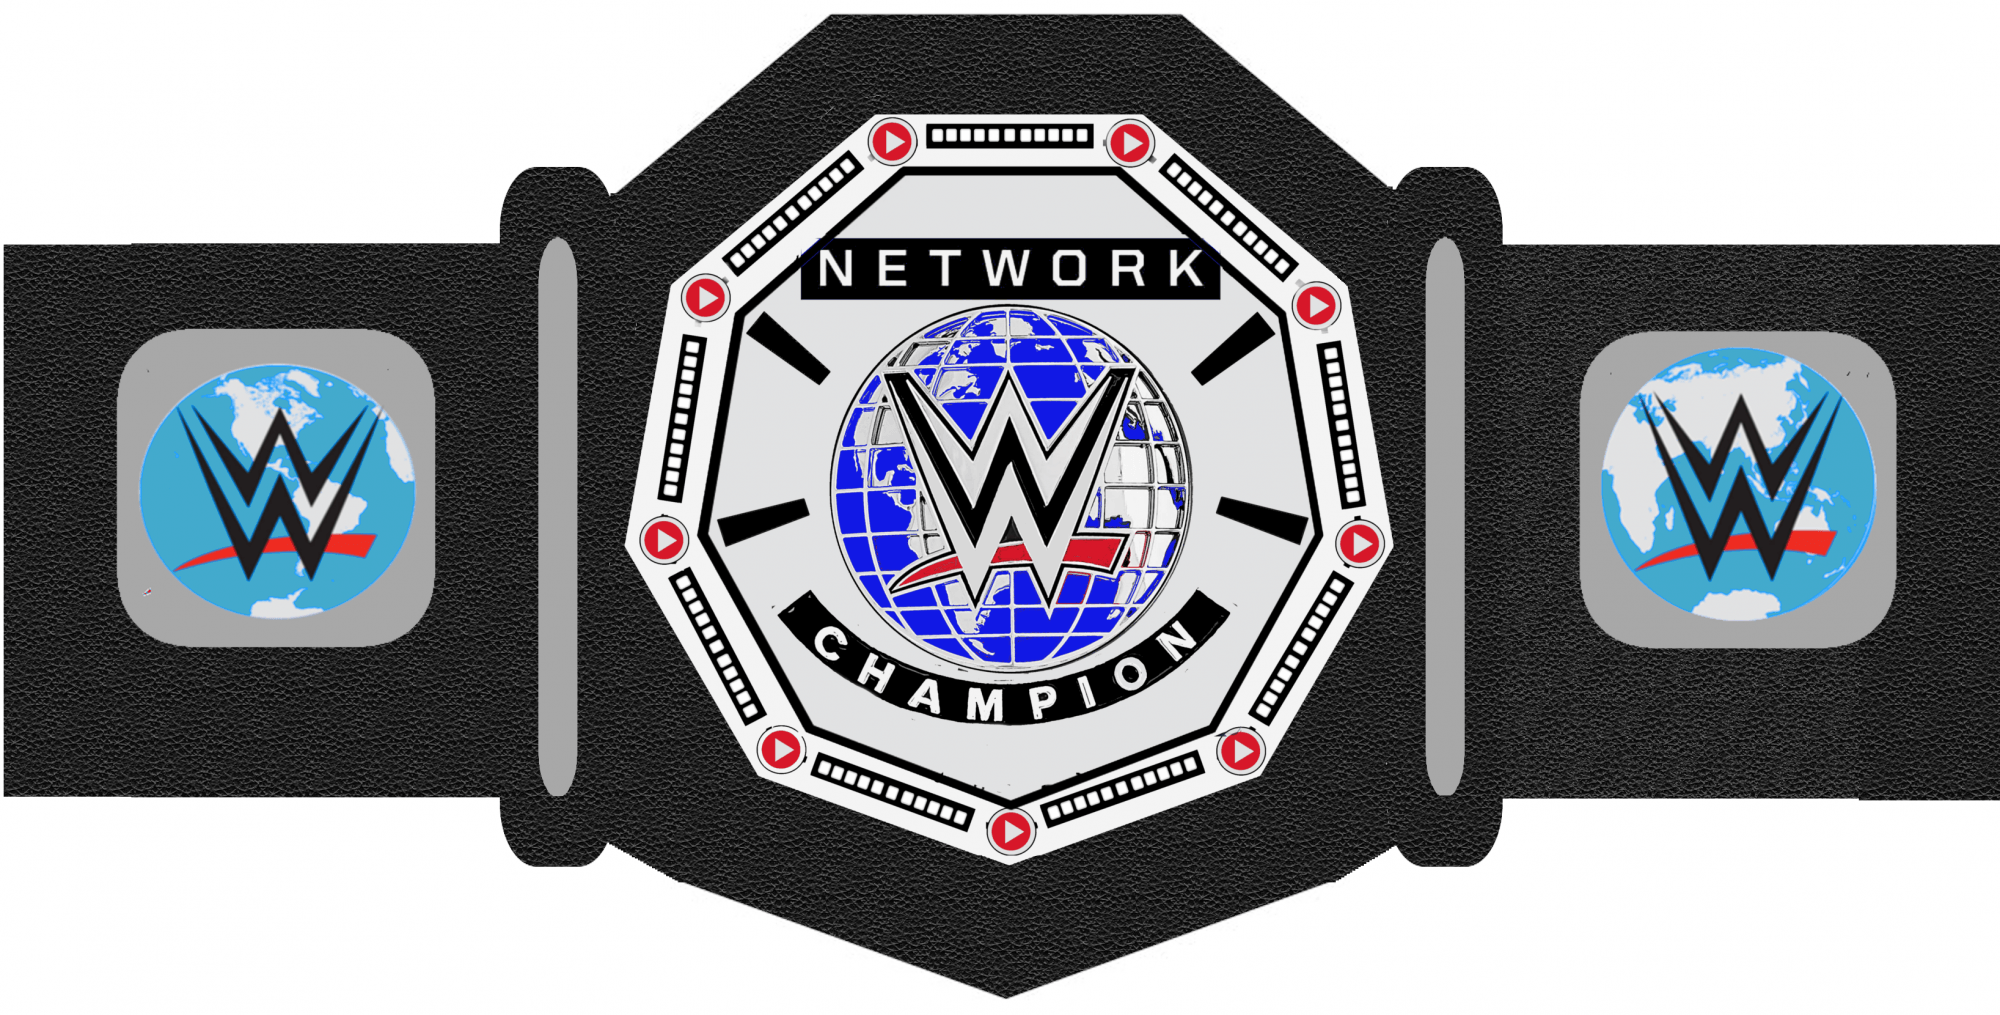 Blets Title Logo - WWE Network Title (created in GIMP) - Concepts - Chris Creamer's ...